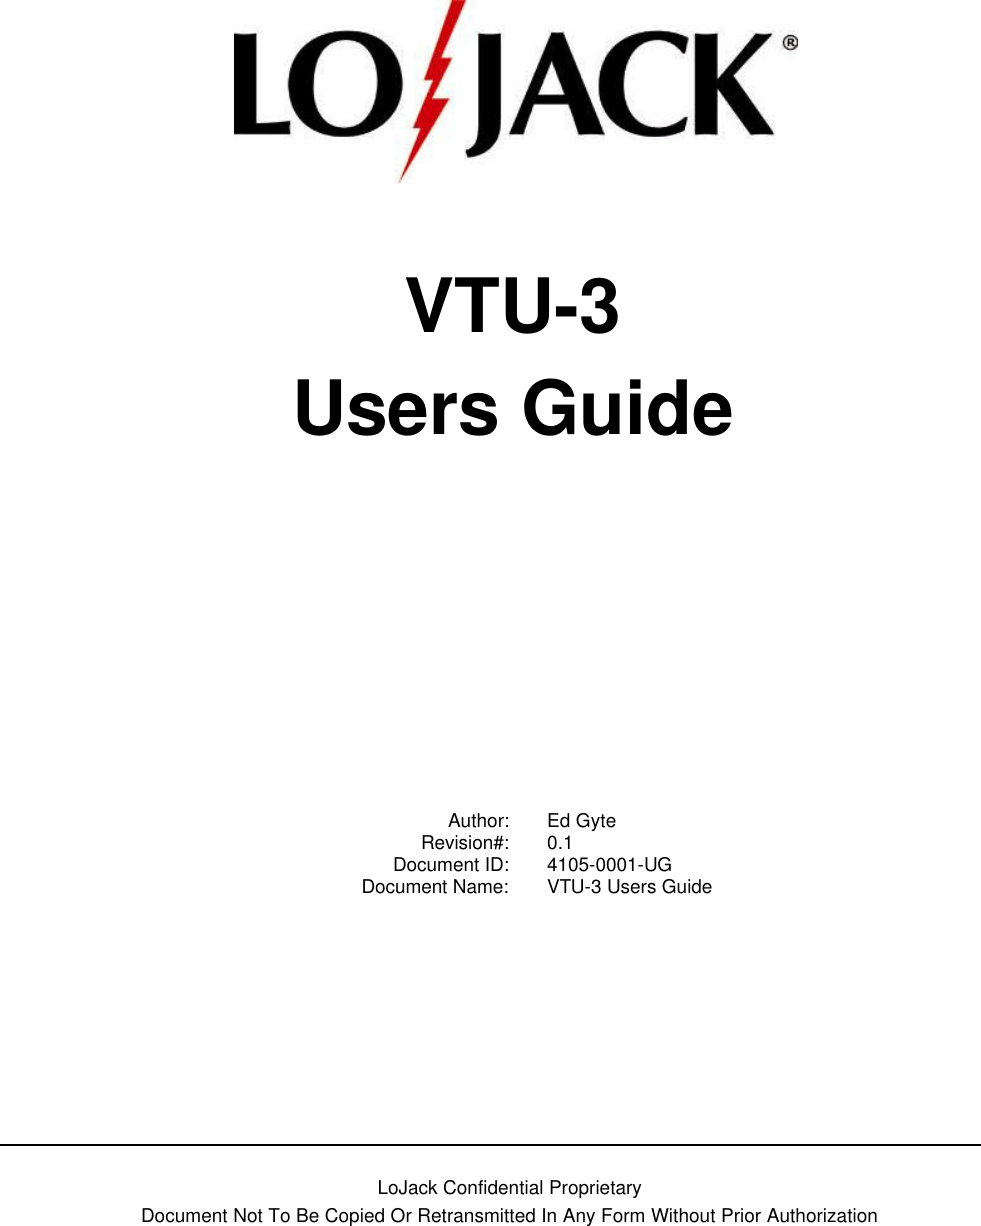   LoJack Confidential Proprietary  Document Not To Be Copied Or Retransmitted In Any Form Without Prior Authorization       VTU-3 Users Guide      Author: Ed Gyte  Revision#: 0.1  Document ID: 4105-0001-UG  Document Name: VTU-3 Users Guide 